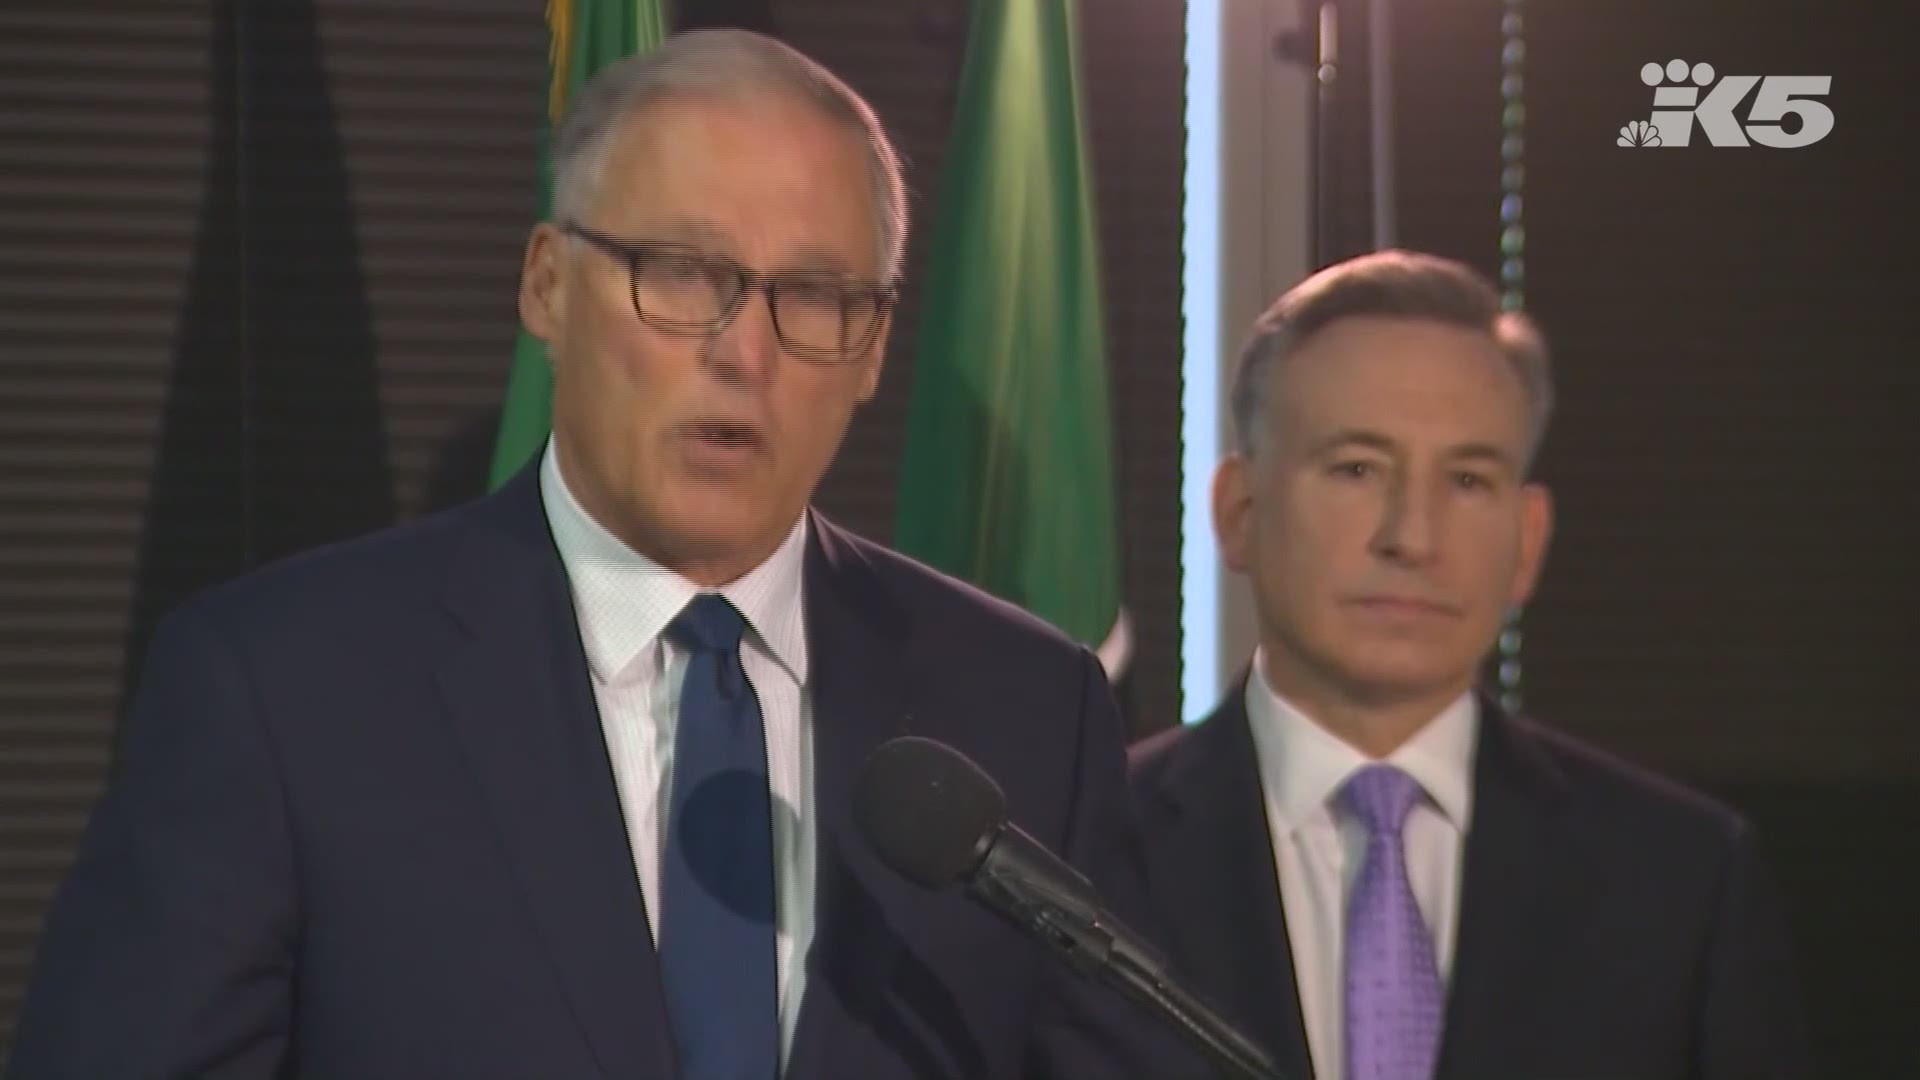 Washington state Gov. Jay Inslee is calling for a statewide ban of flavored vaping products as the number of cases of lung illness increase.